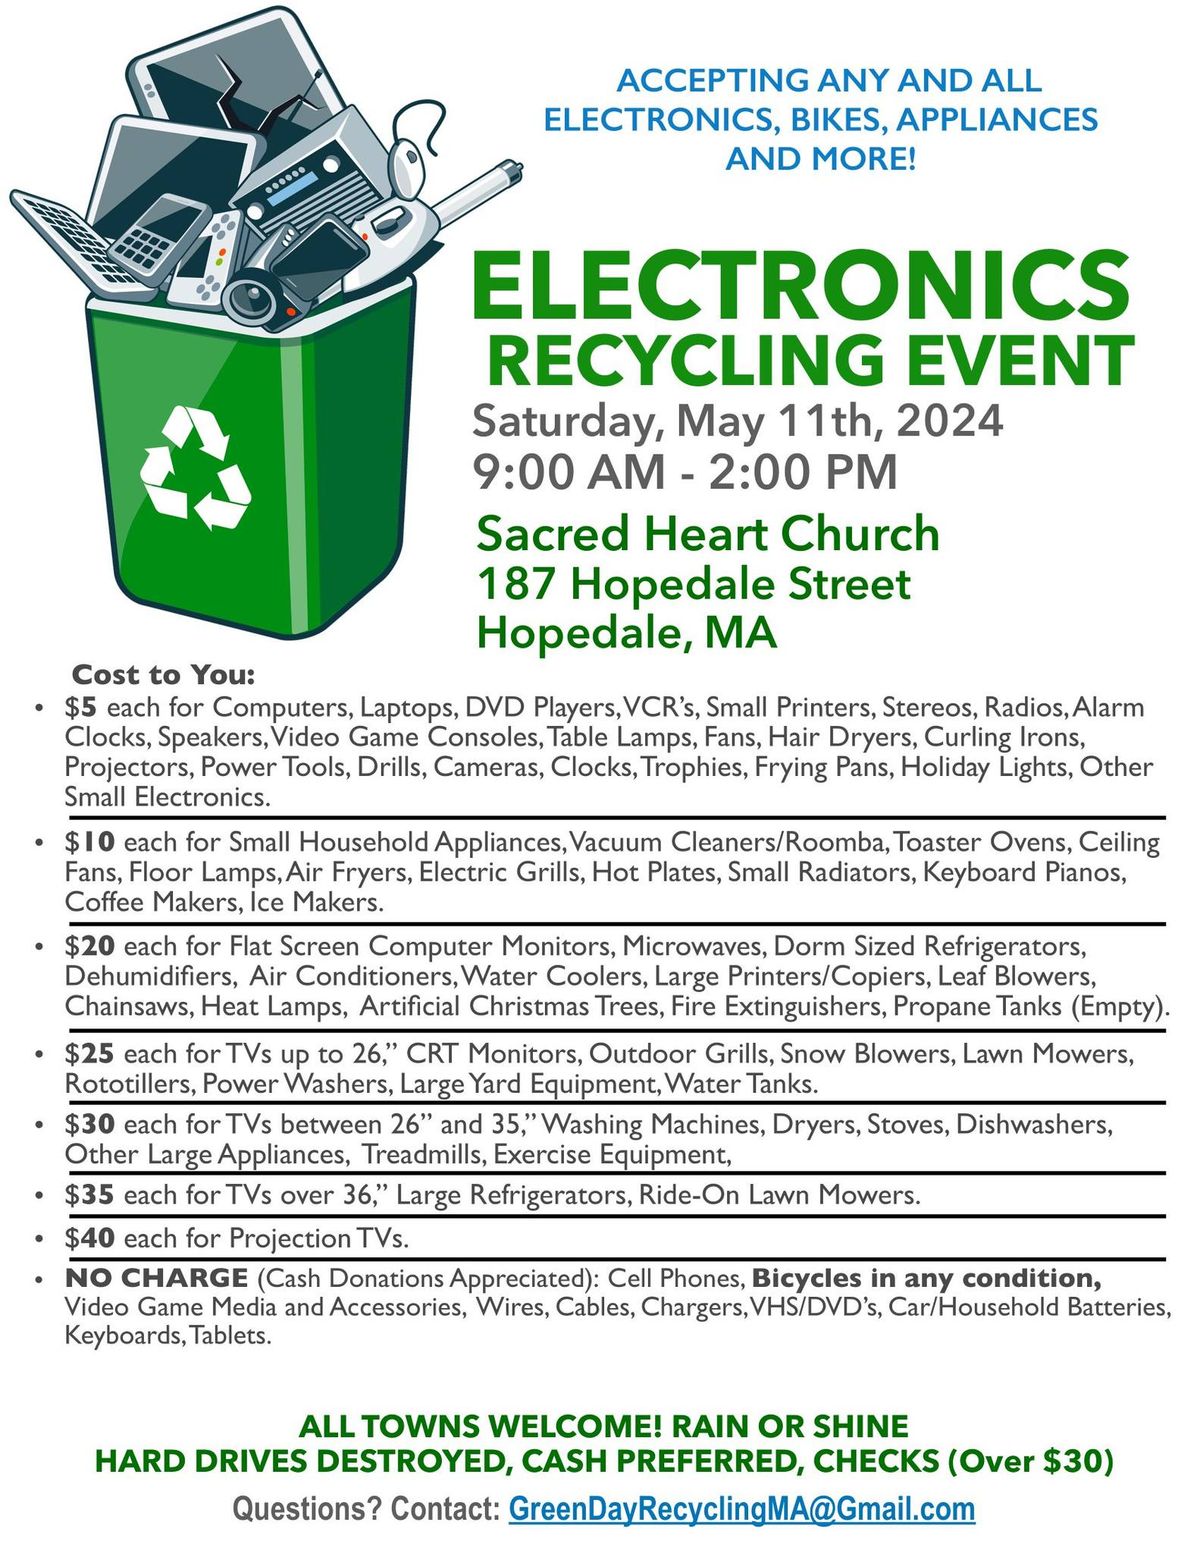 Hopedale Electronics Recycling Event